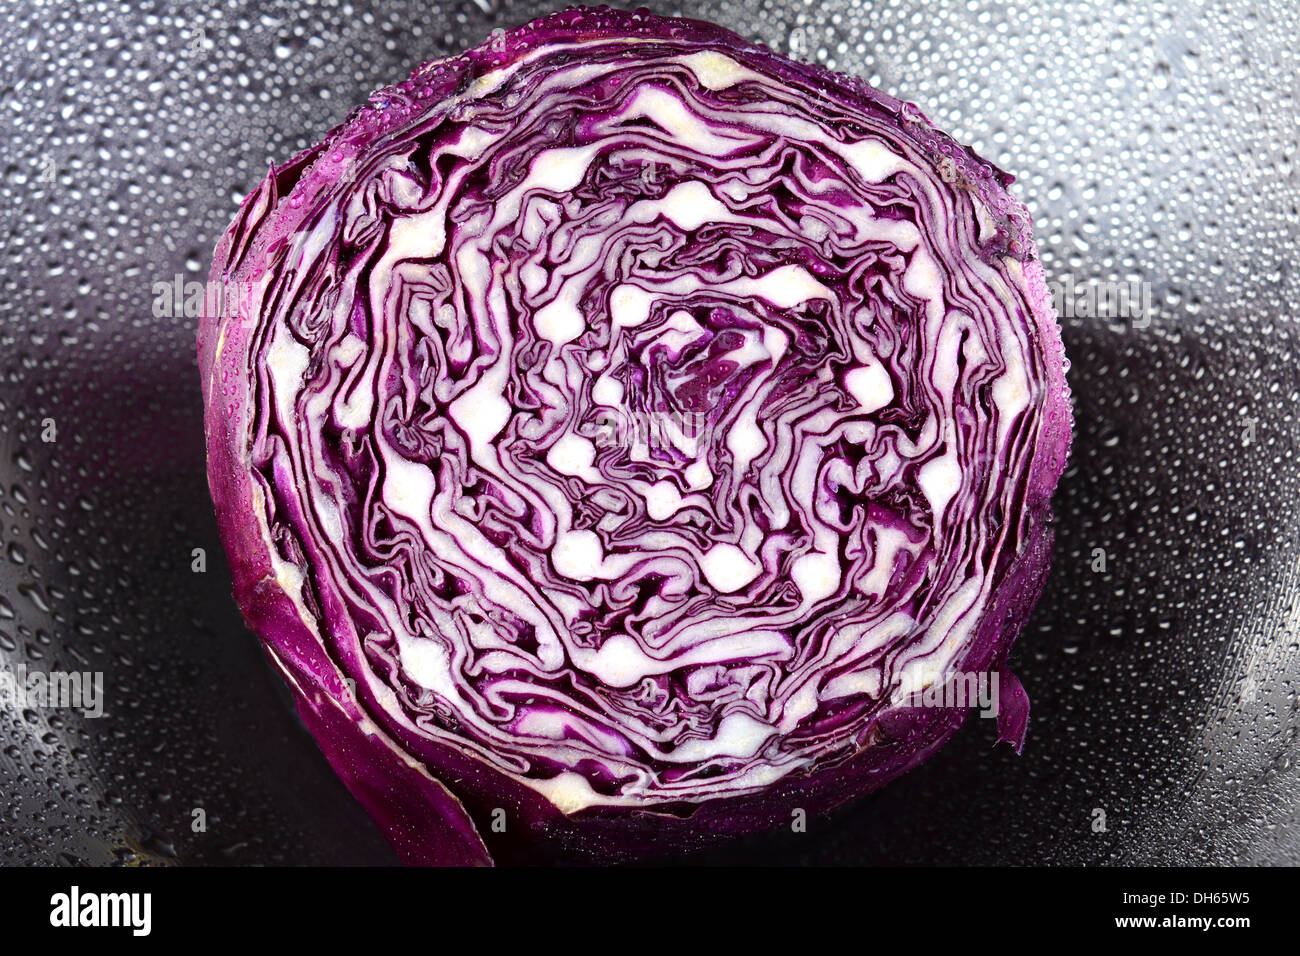 Closeup of a head of red cabbage in a stainless steel bowl with water droplets. Stock Photo